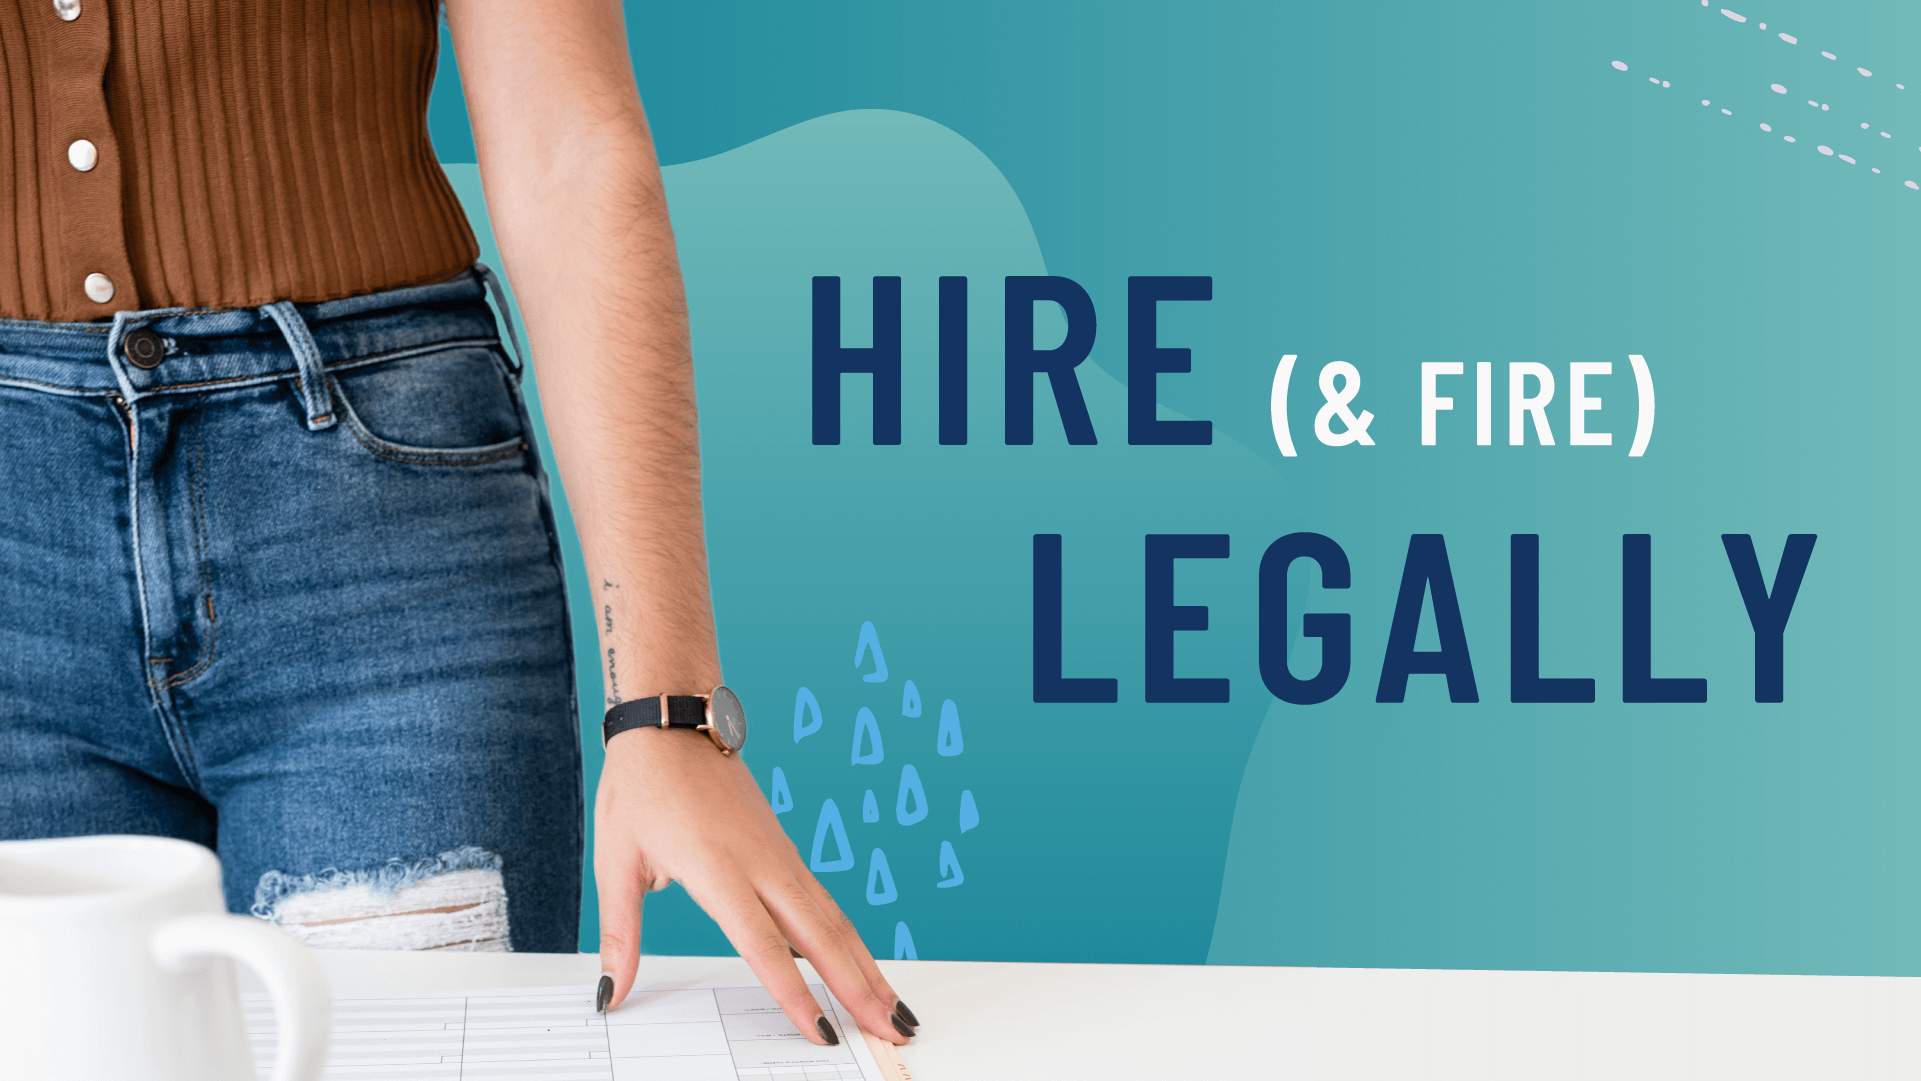 Is Your Team Growing? Here’s How to Hire (and Fire) Legally